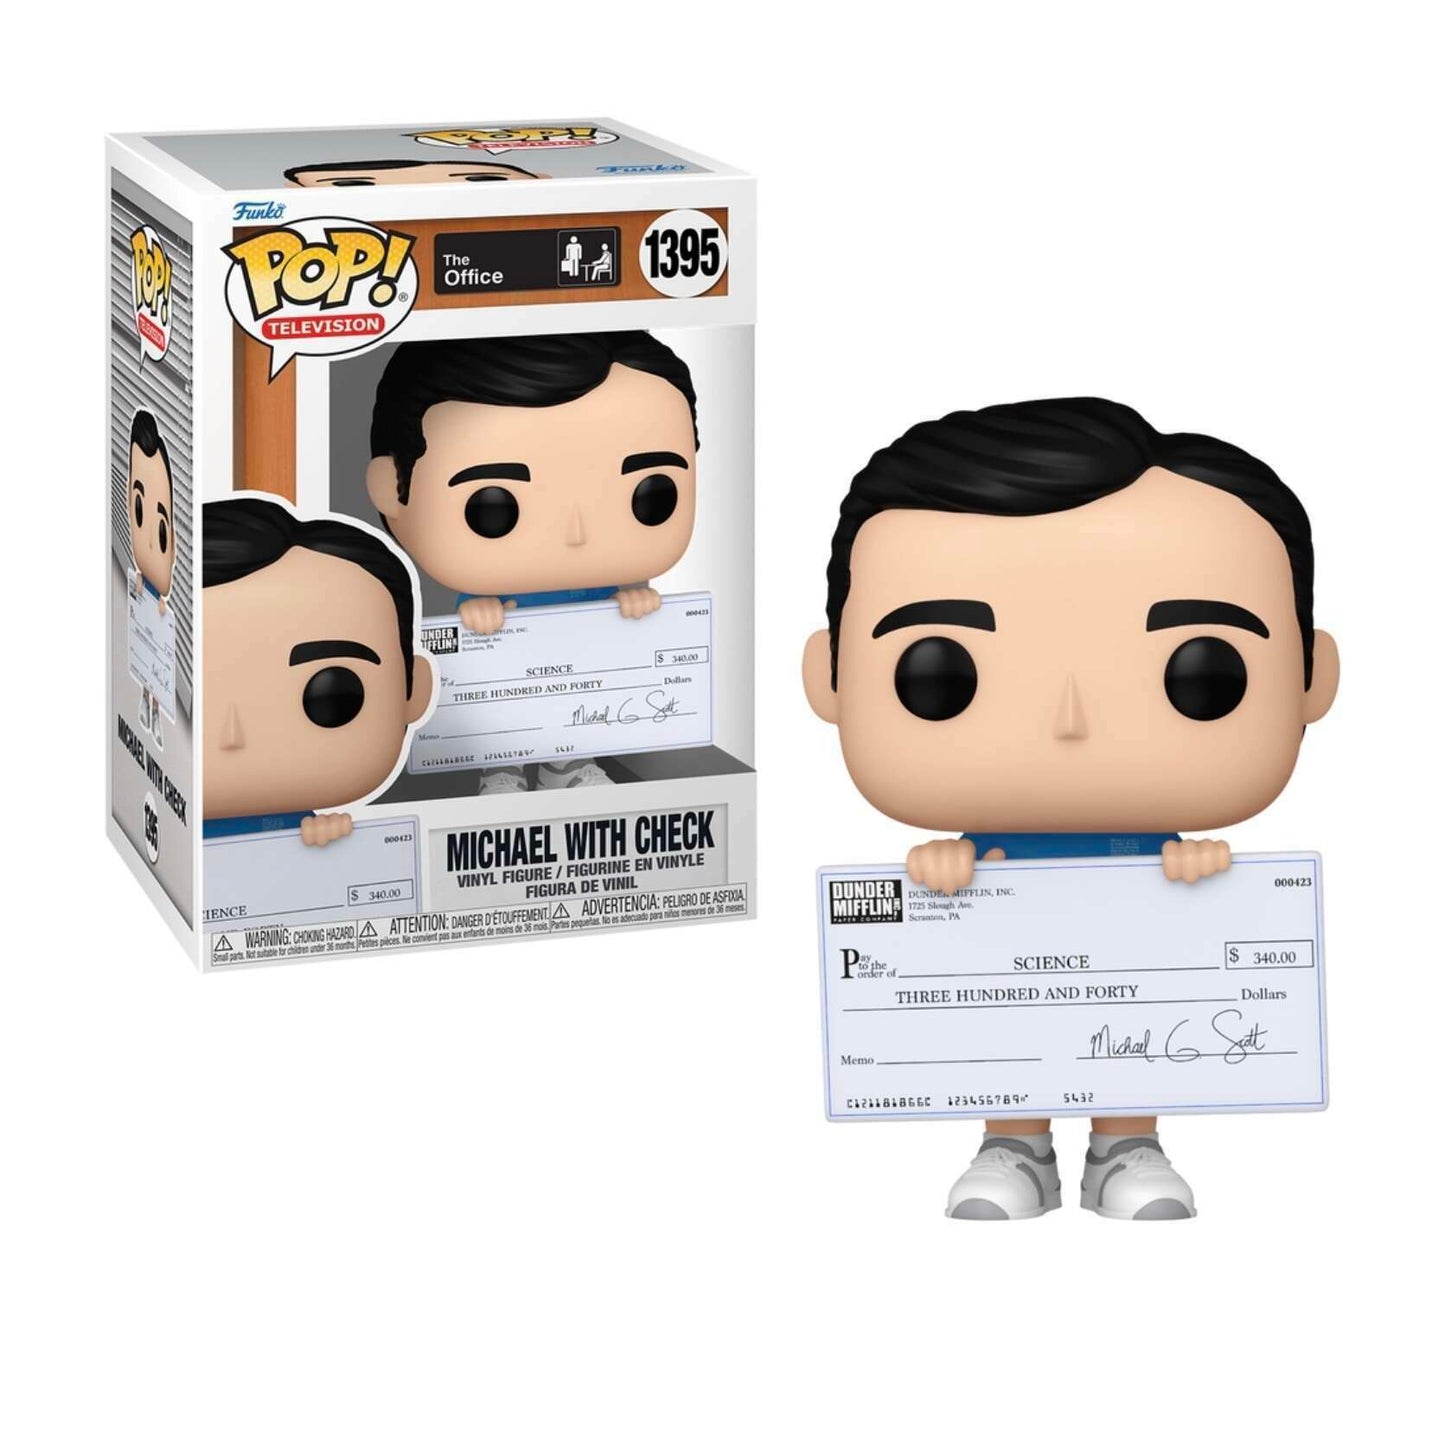 The Office - MIchael with Check #1395 - Funko Pop! Vinyl Figure (Television)